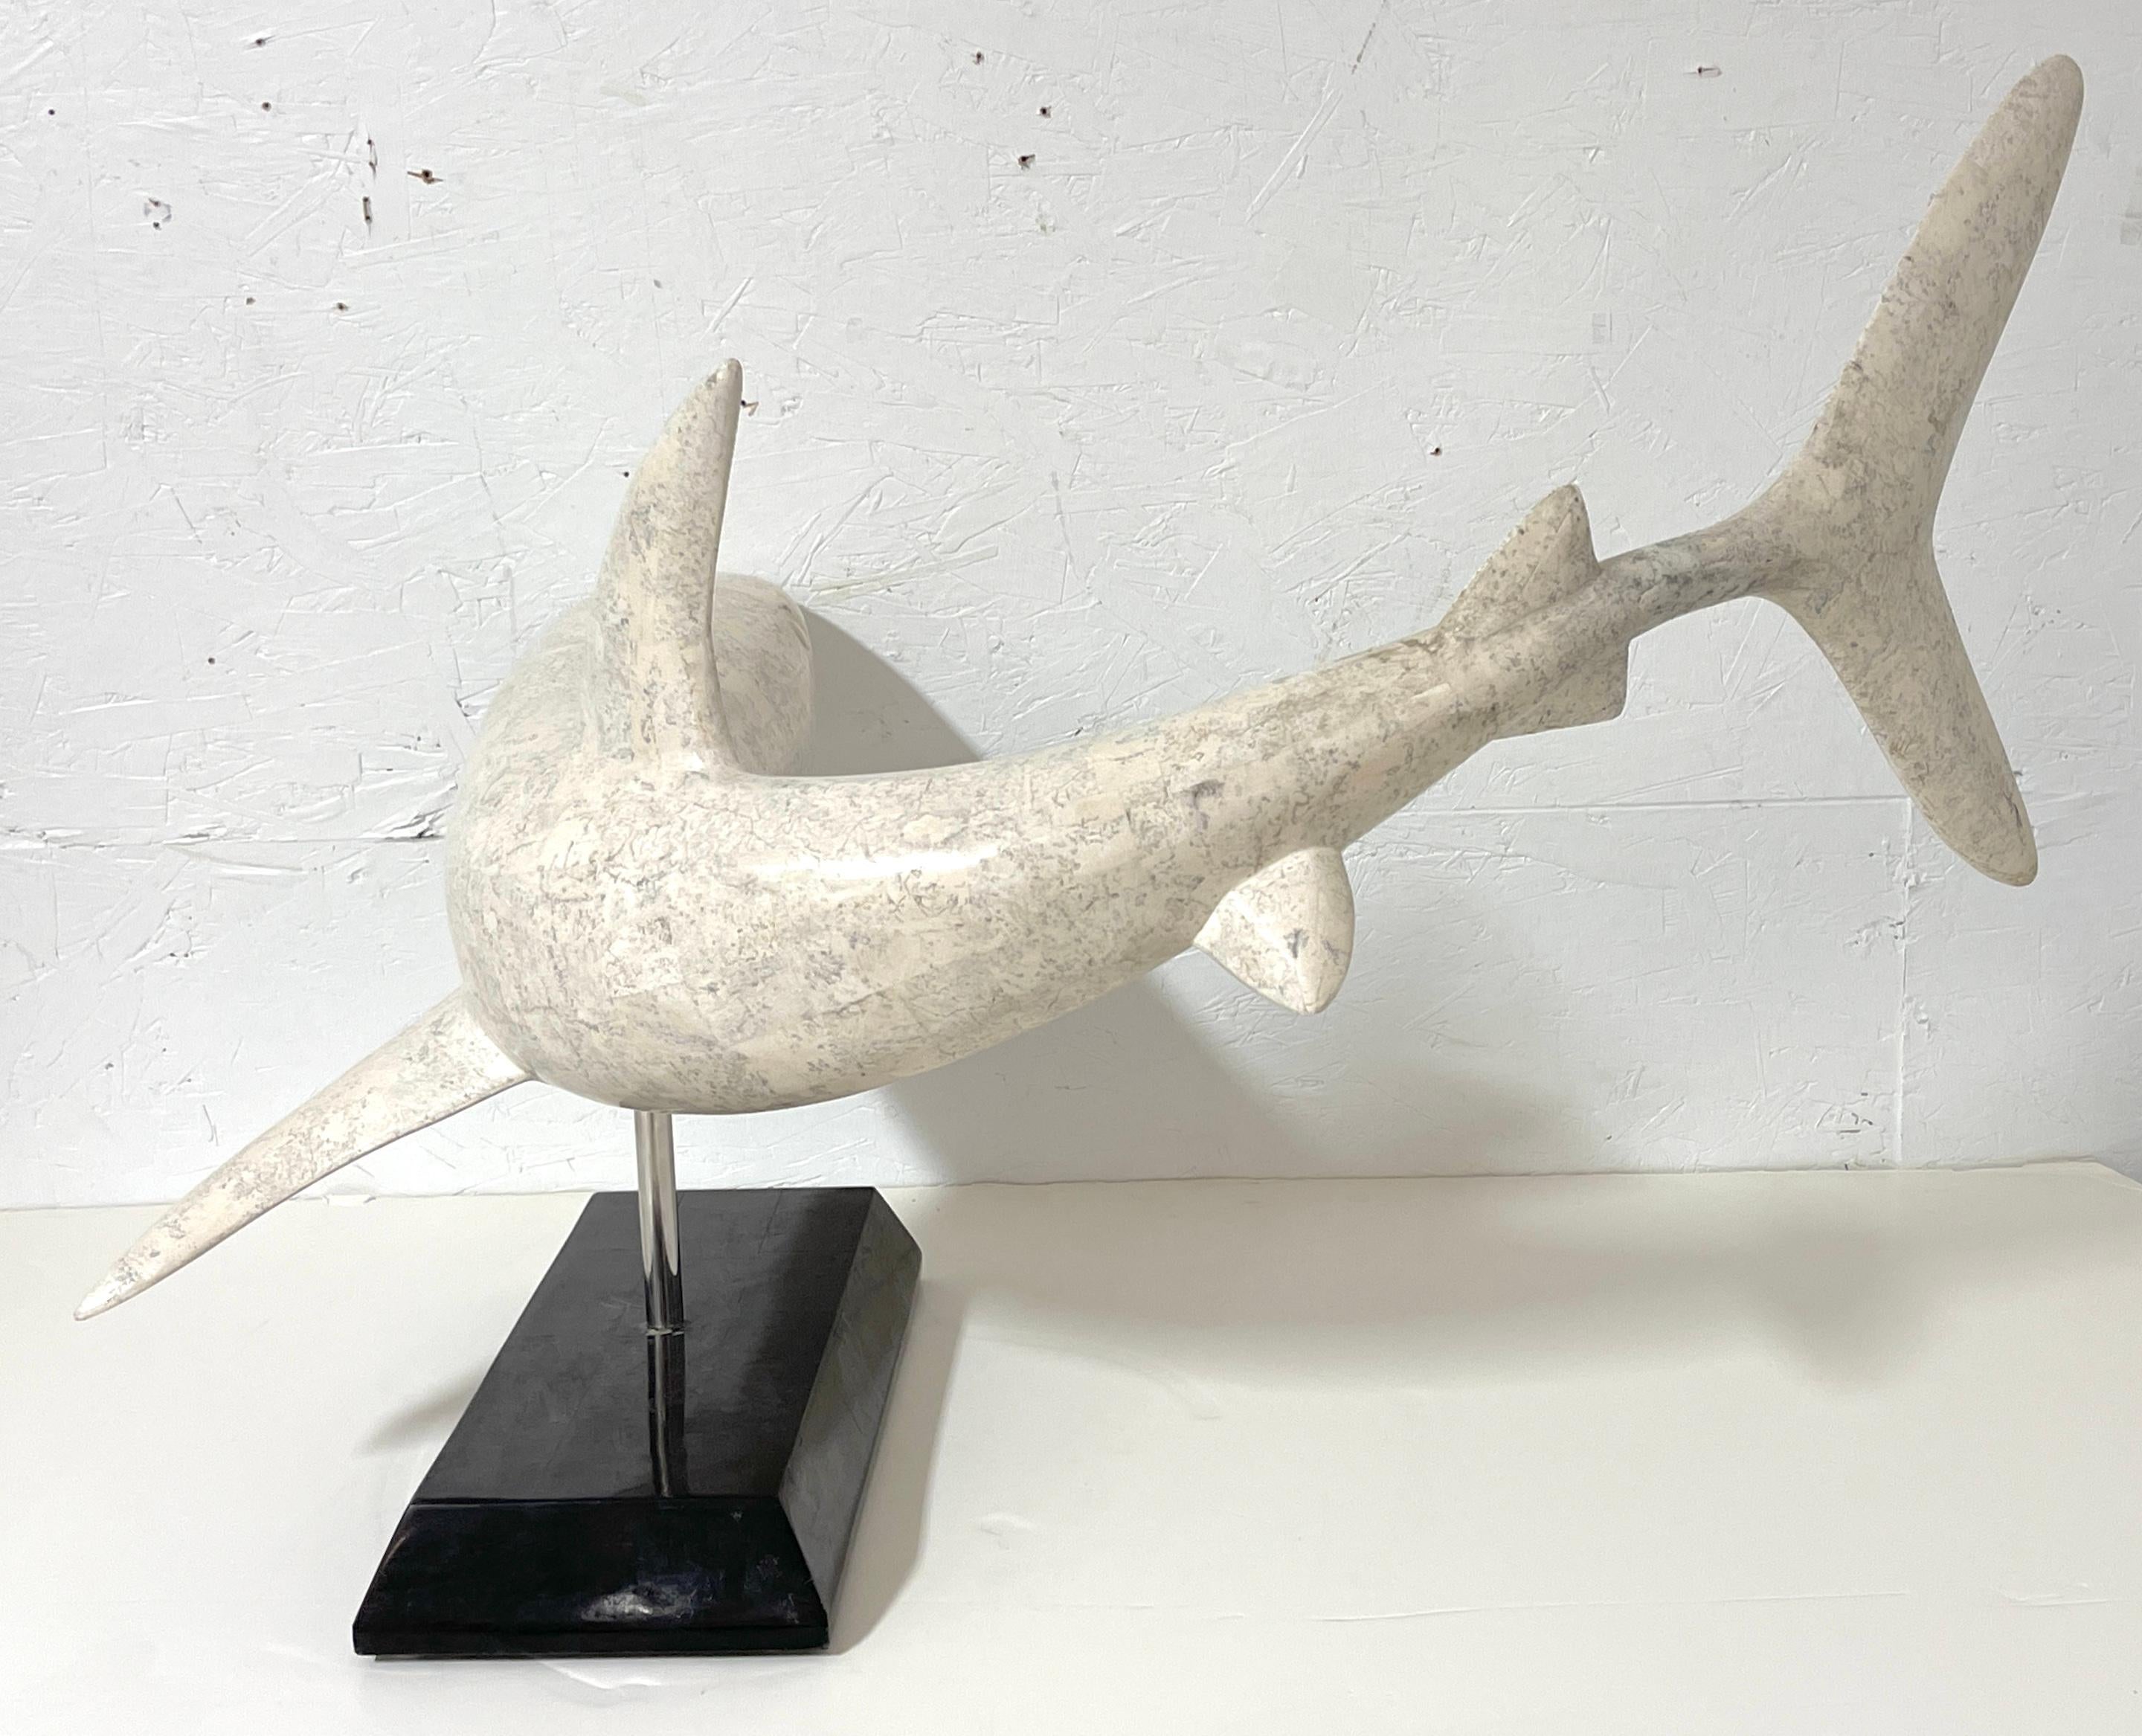 Large Modern Inlaid Tessellated Stone Sculpture of a Great White Shark   For Sale 1